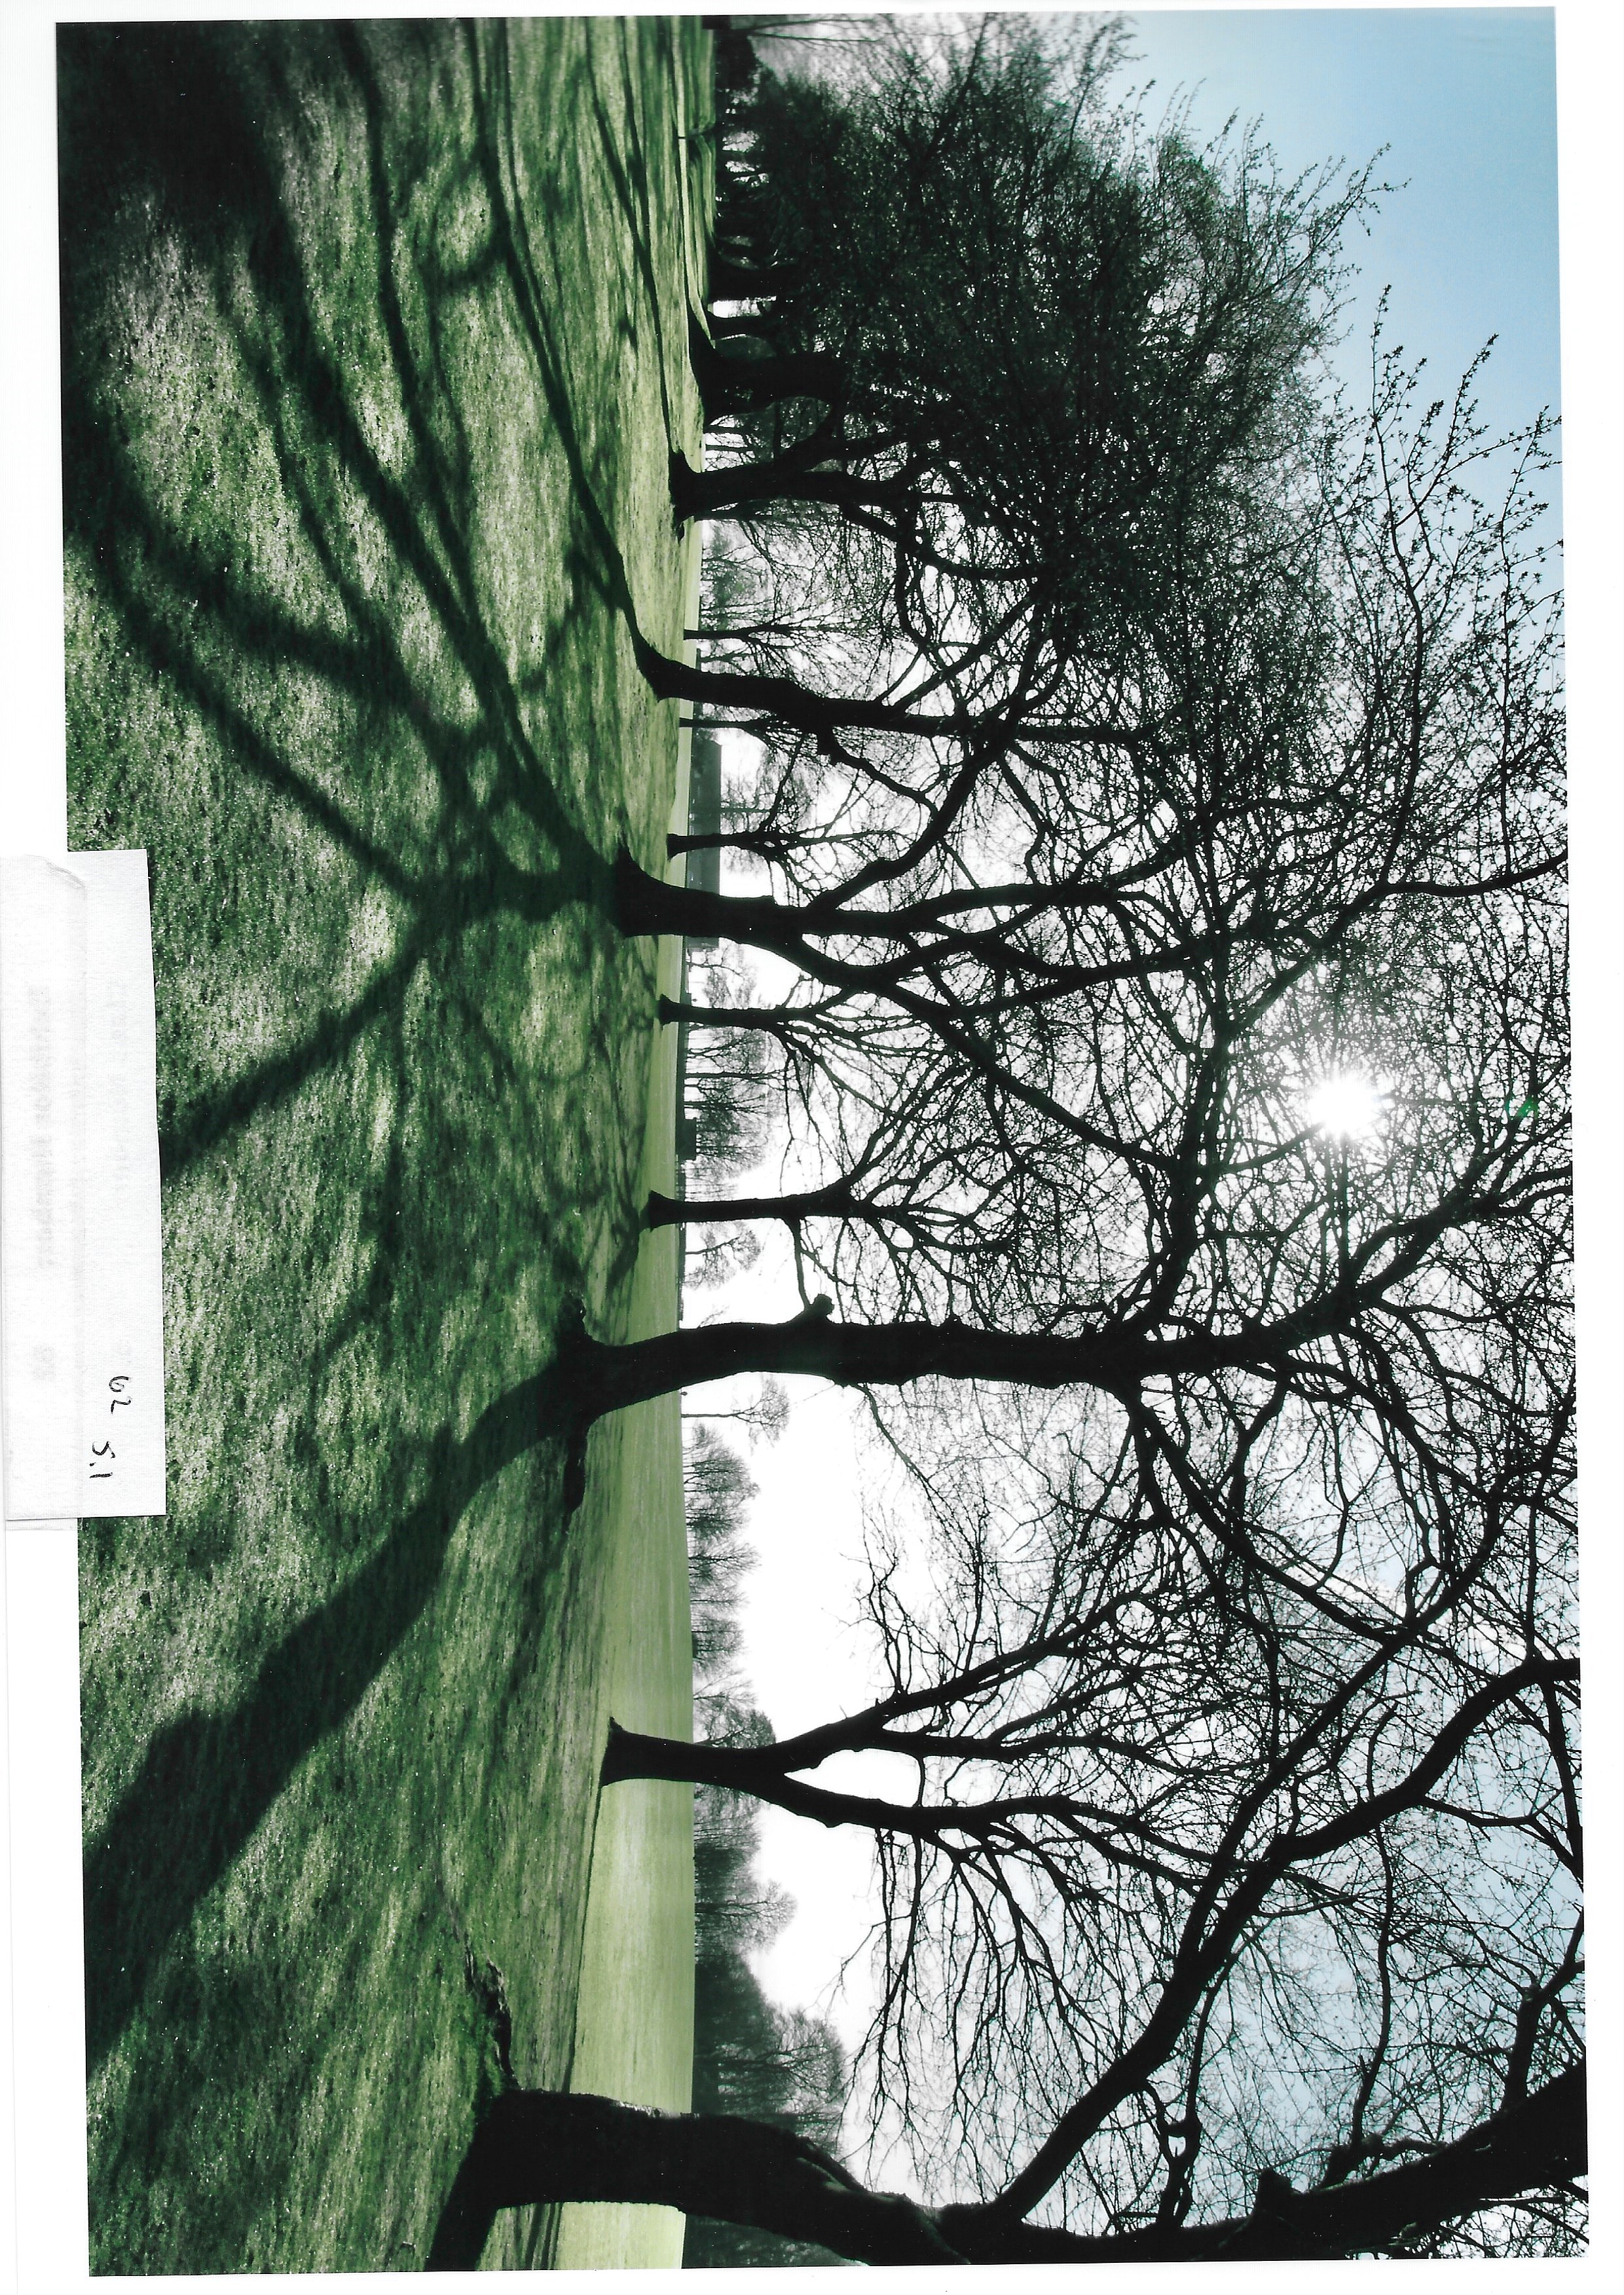 Best in Section Rosette: Awarded to T Kille for his entry in Class 5.1: A photography entitled “Trees”